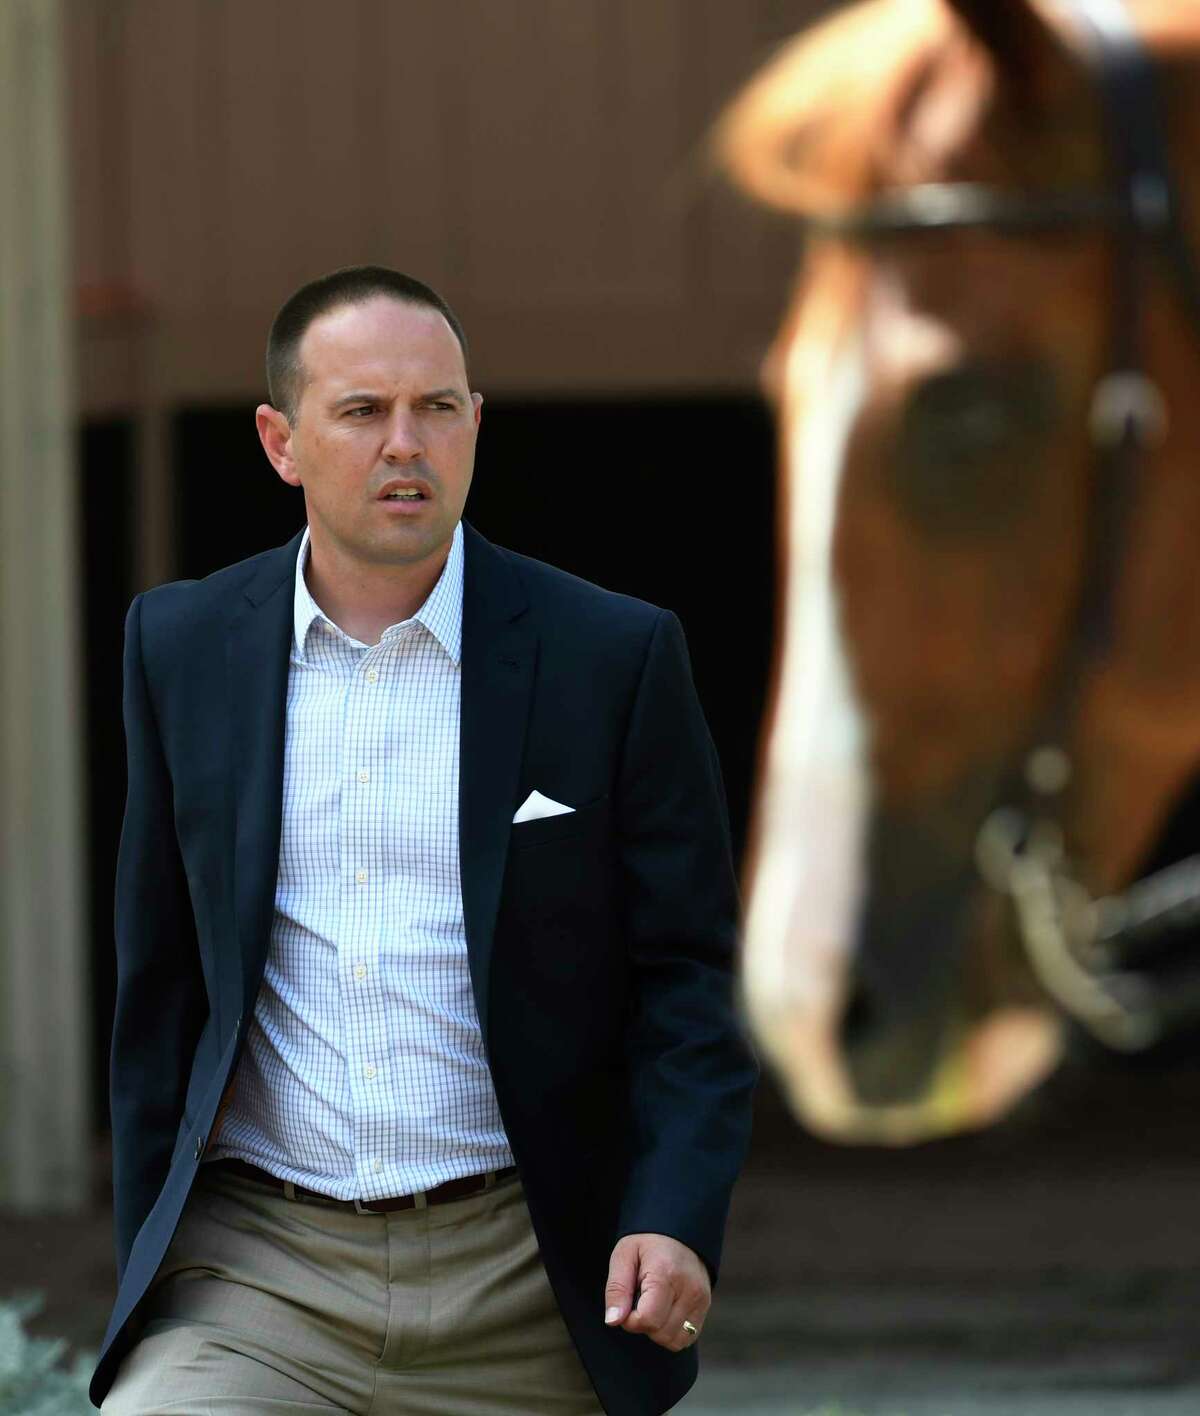 Mechanicville-based thoroughbred horse trainer Chad Brown, has agreed to pay more than $1.6 million in illegally withheld worker wages and government penalties as a result of a federal labor law investigation. (Skip Dickstein/Times Union archives)